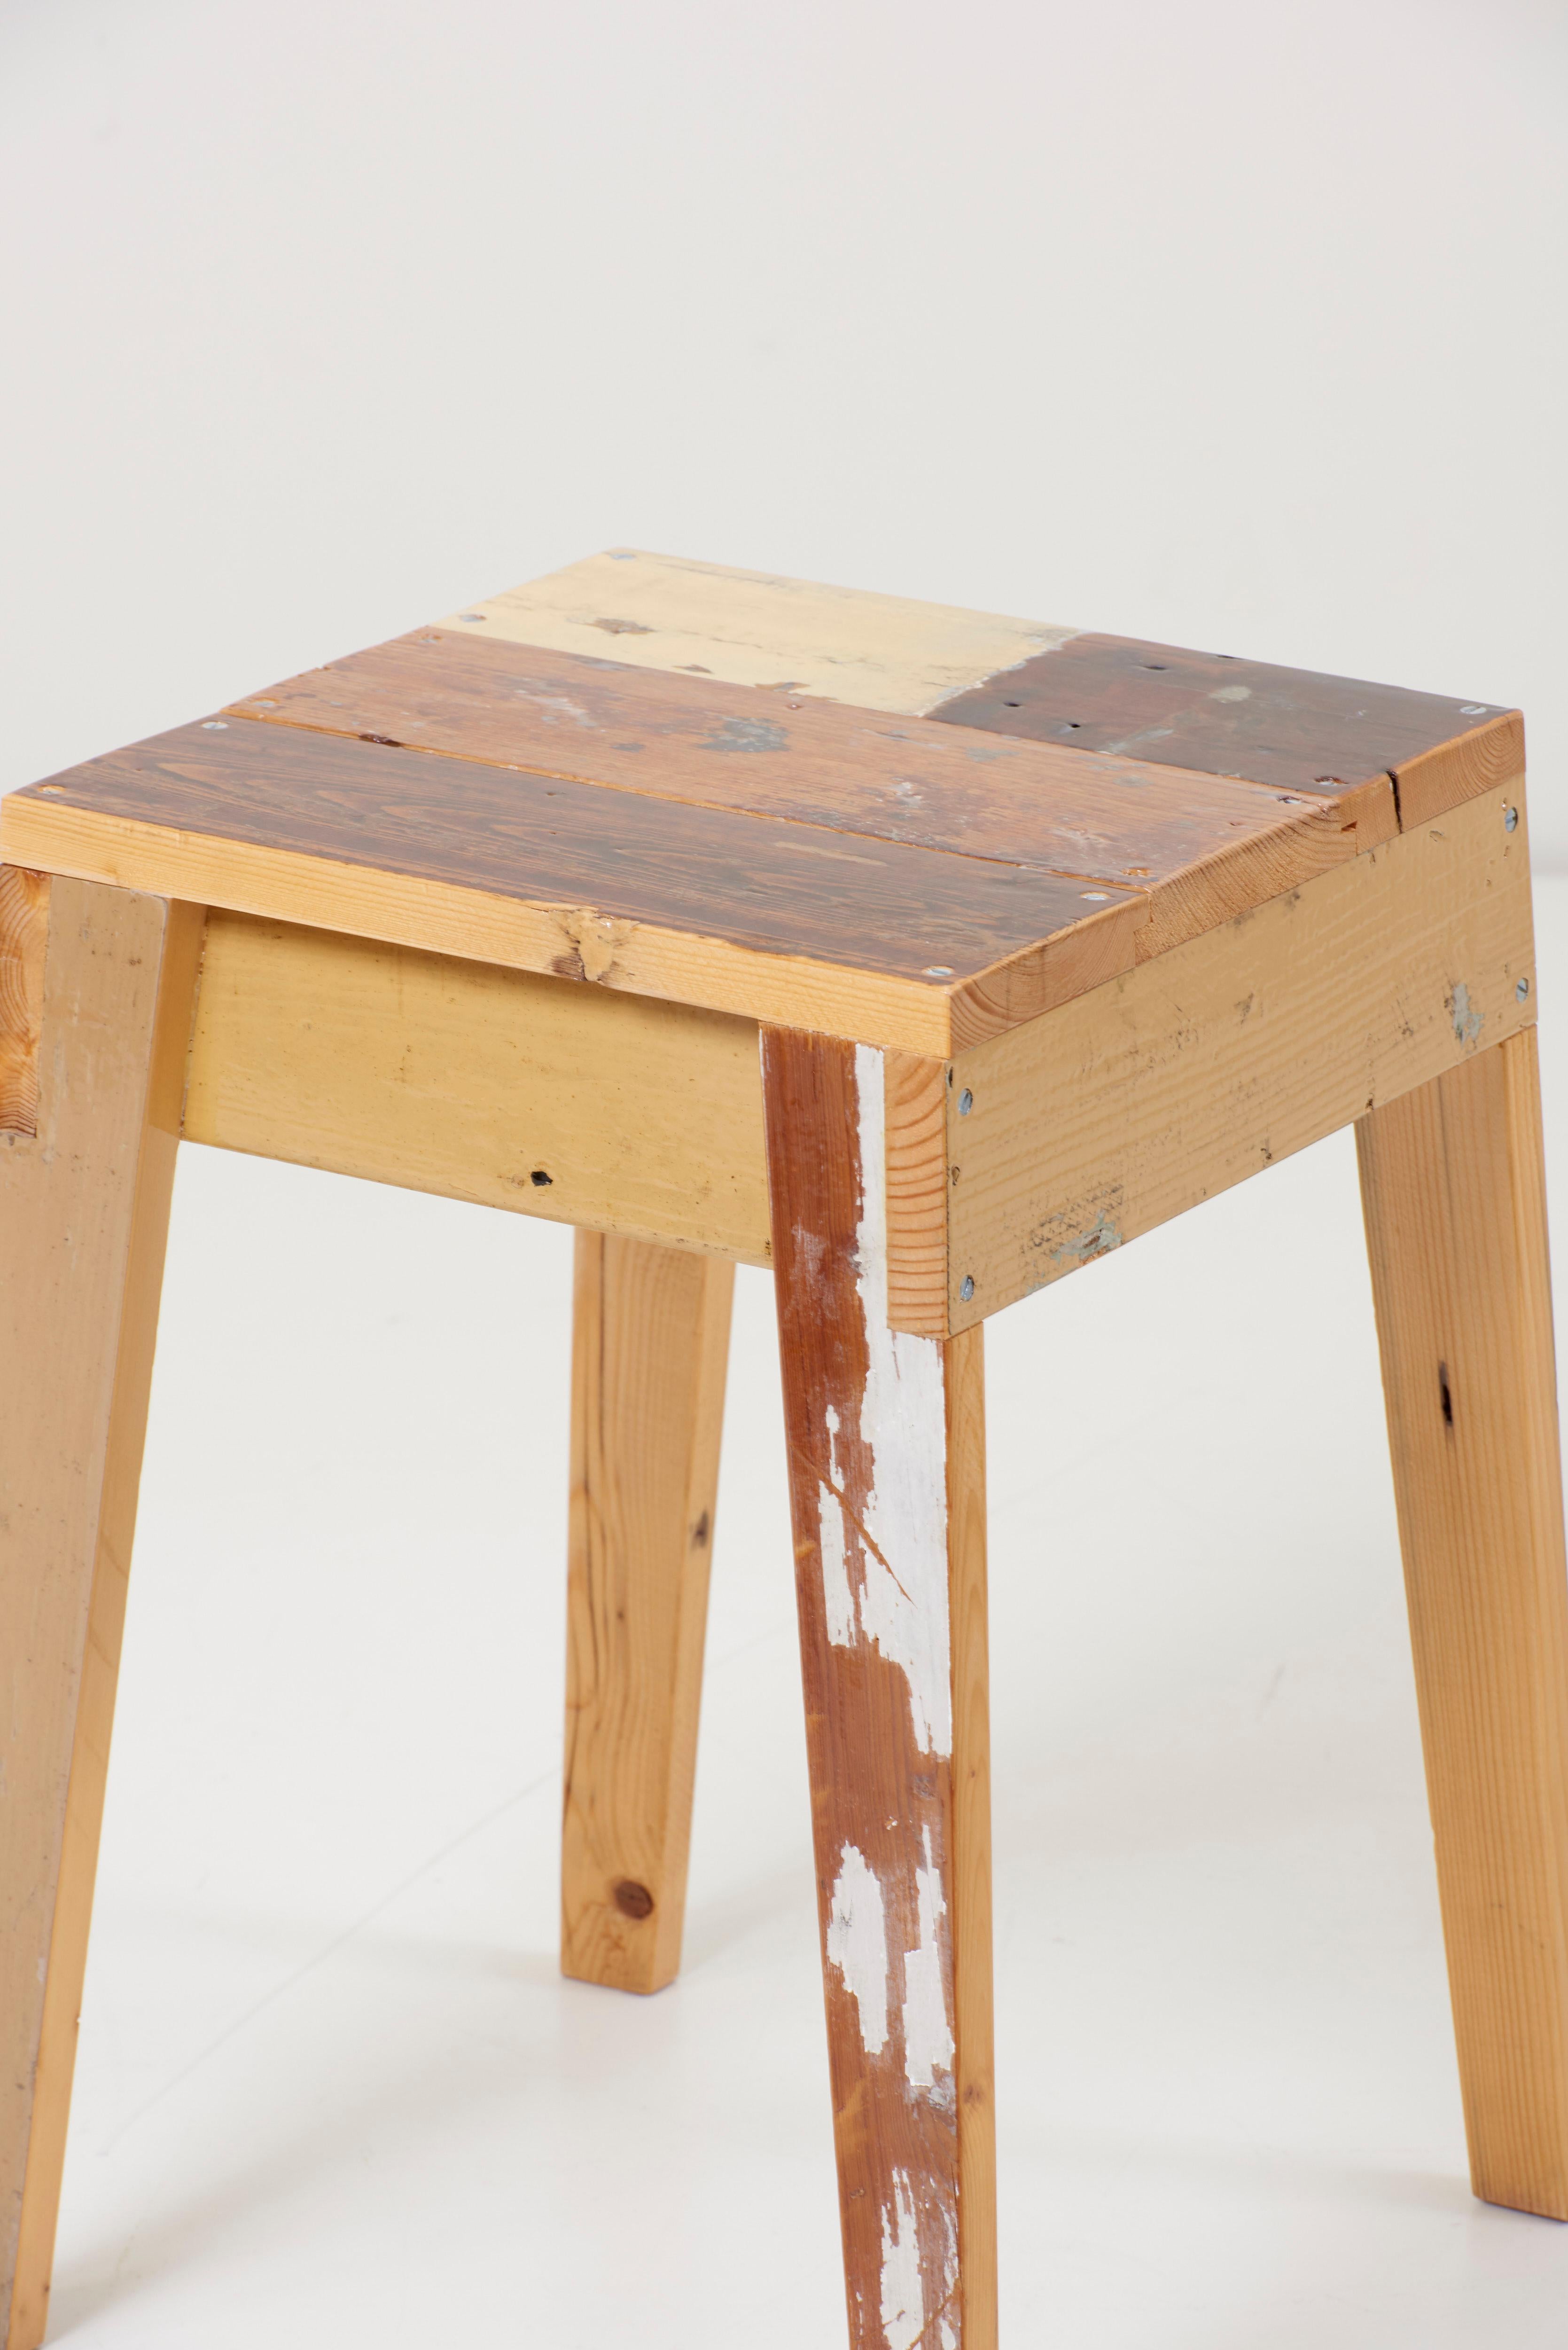 Wood Pair of Lacquered Oak Stools by Piet Hein Eek